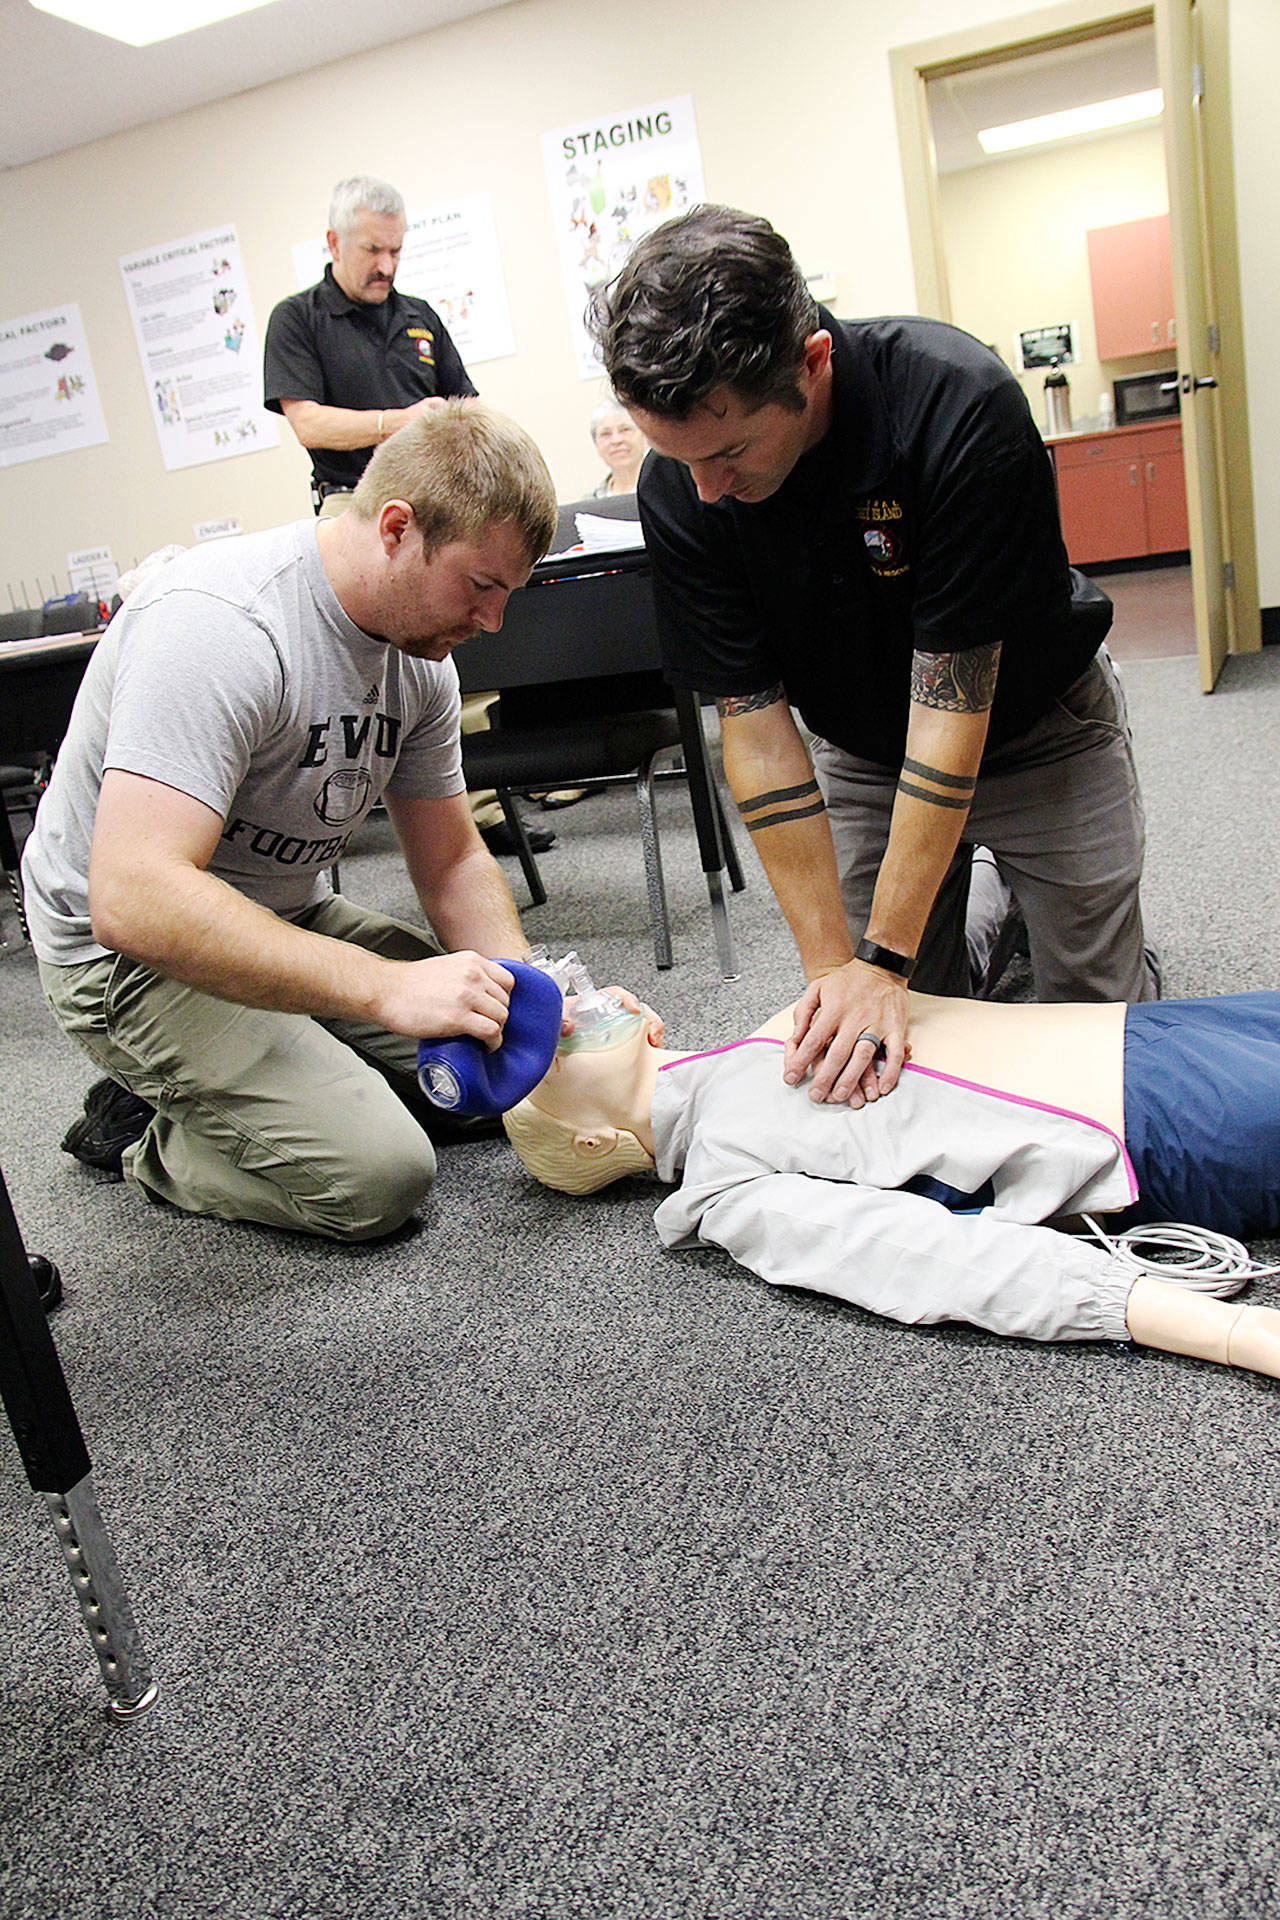 Kole Kellison, left, and Capt. Jerry Helm perform a demonstration with Central Whidbey Island Fire and Rescue’s new high-tech CPR dummy. Fire commissioners watched a display of the dummy’s simulated vitals change as the two provided treatment. Photo by Laura Guido/Whidbey News-Times